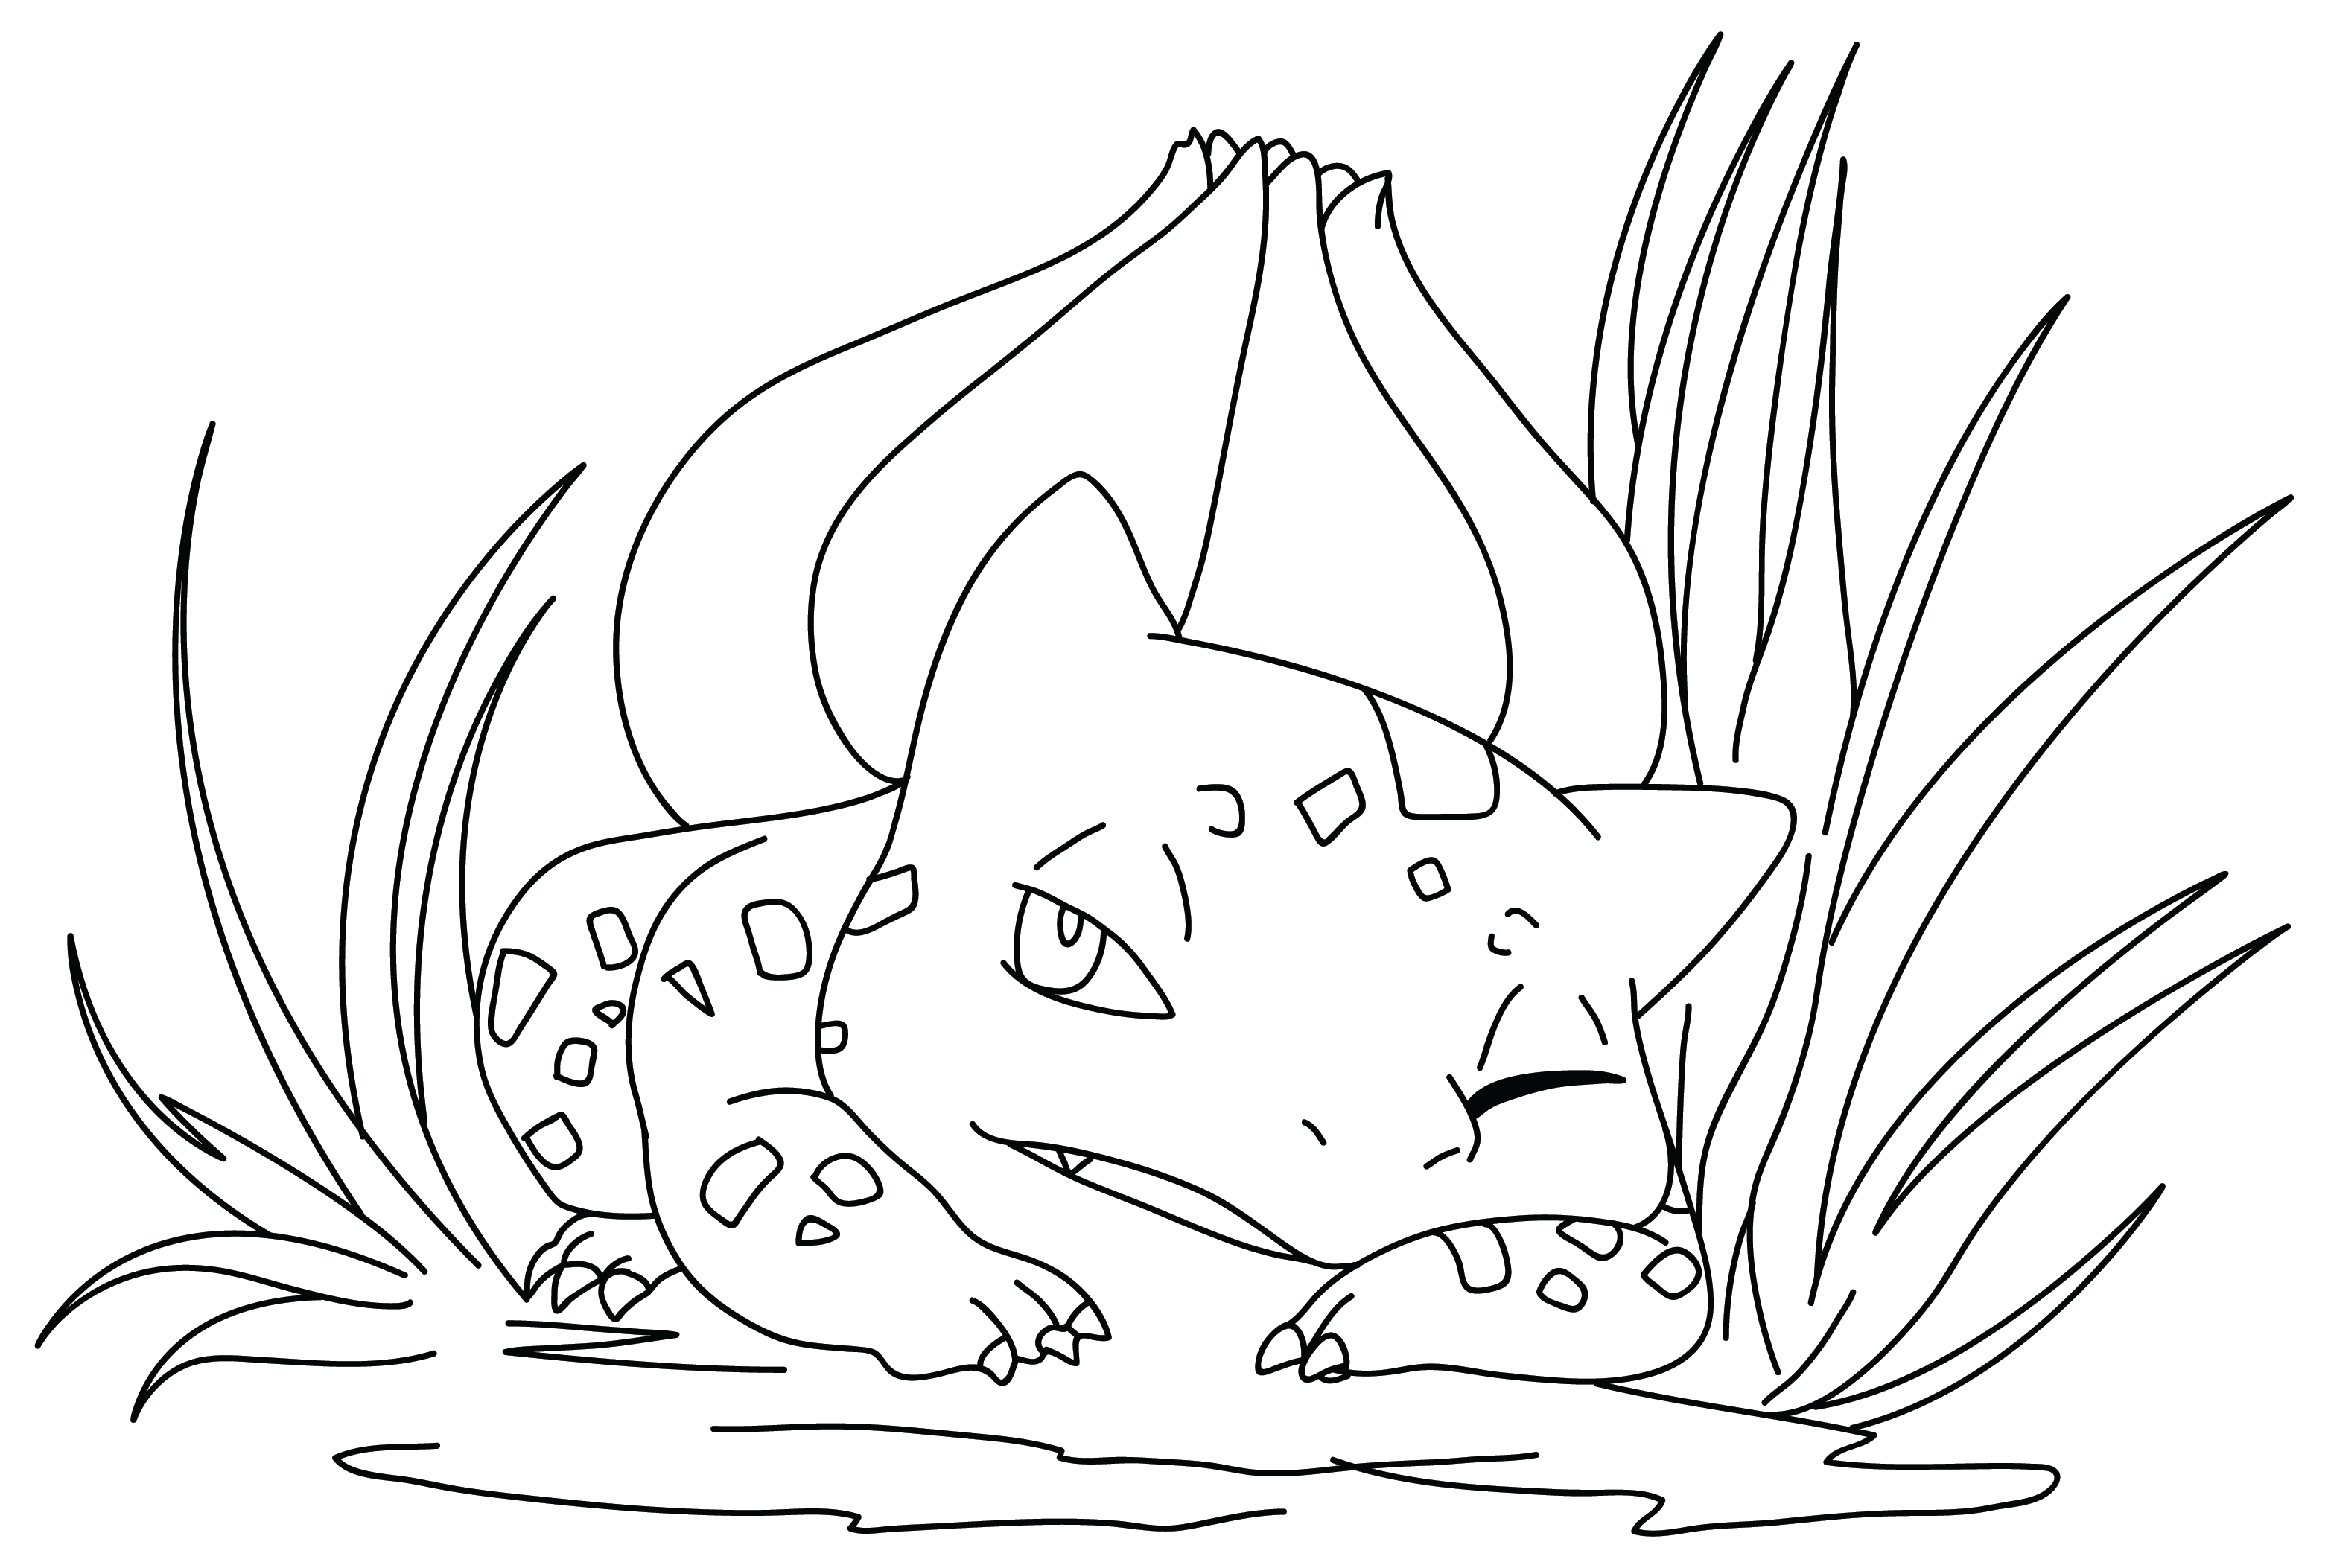 Bulbasaur Coloring Pages to Printable from Bulbasaur